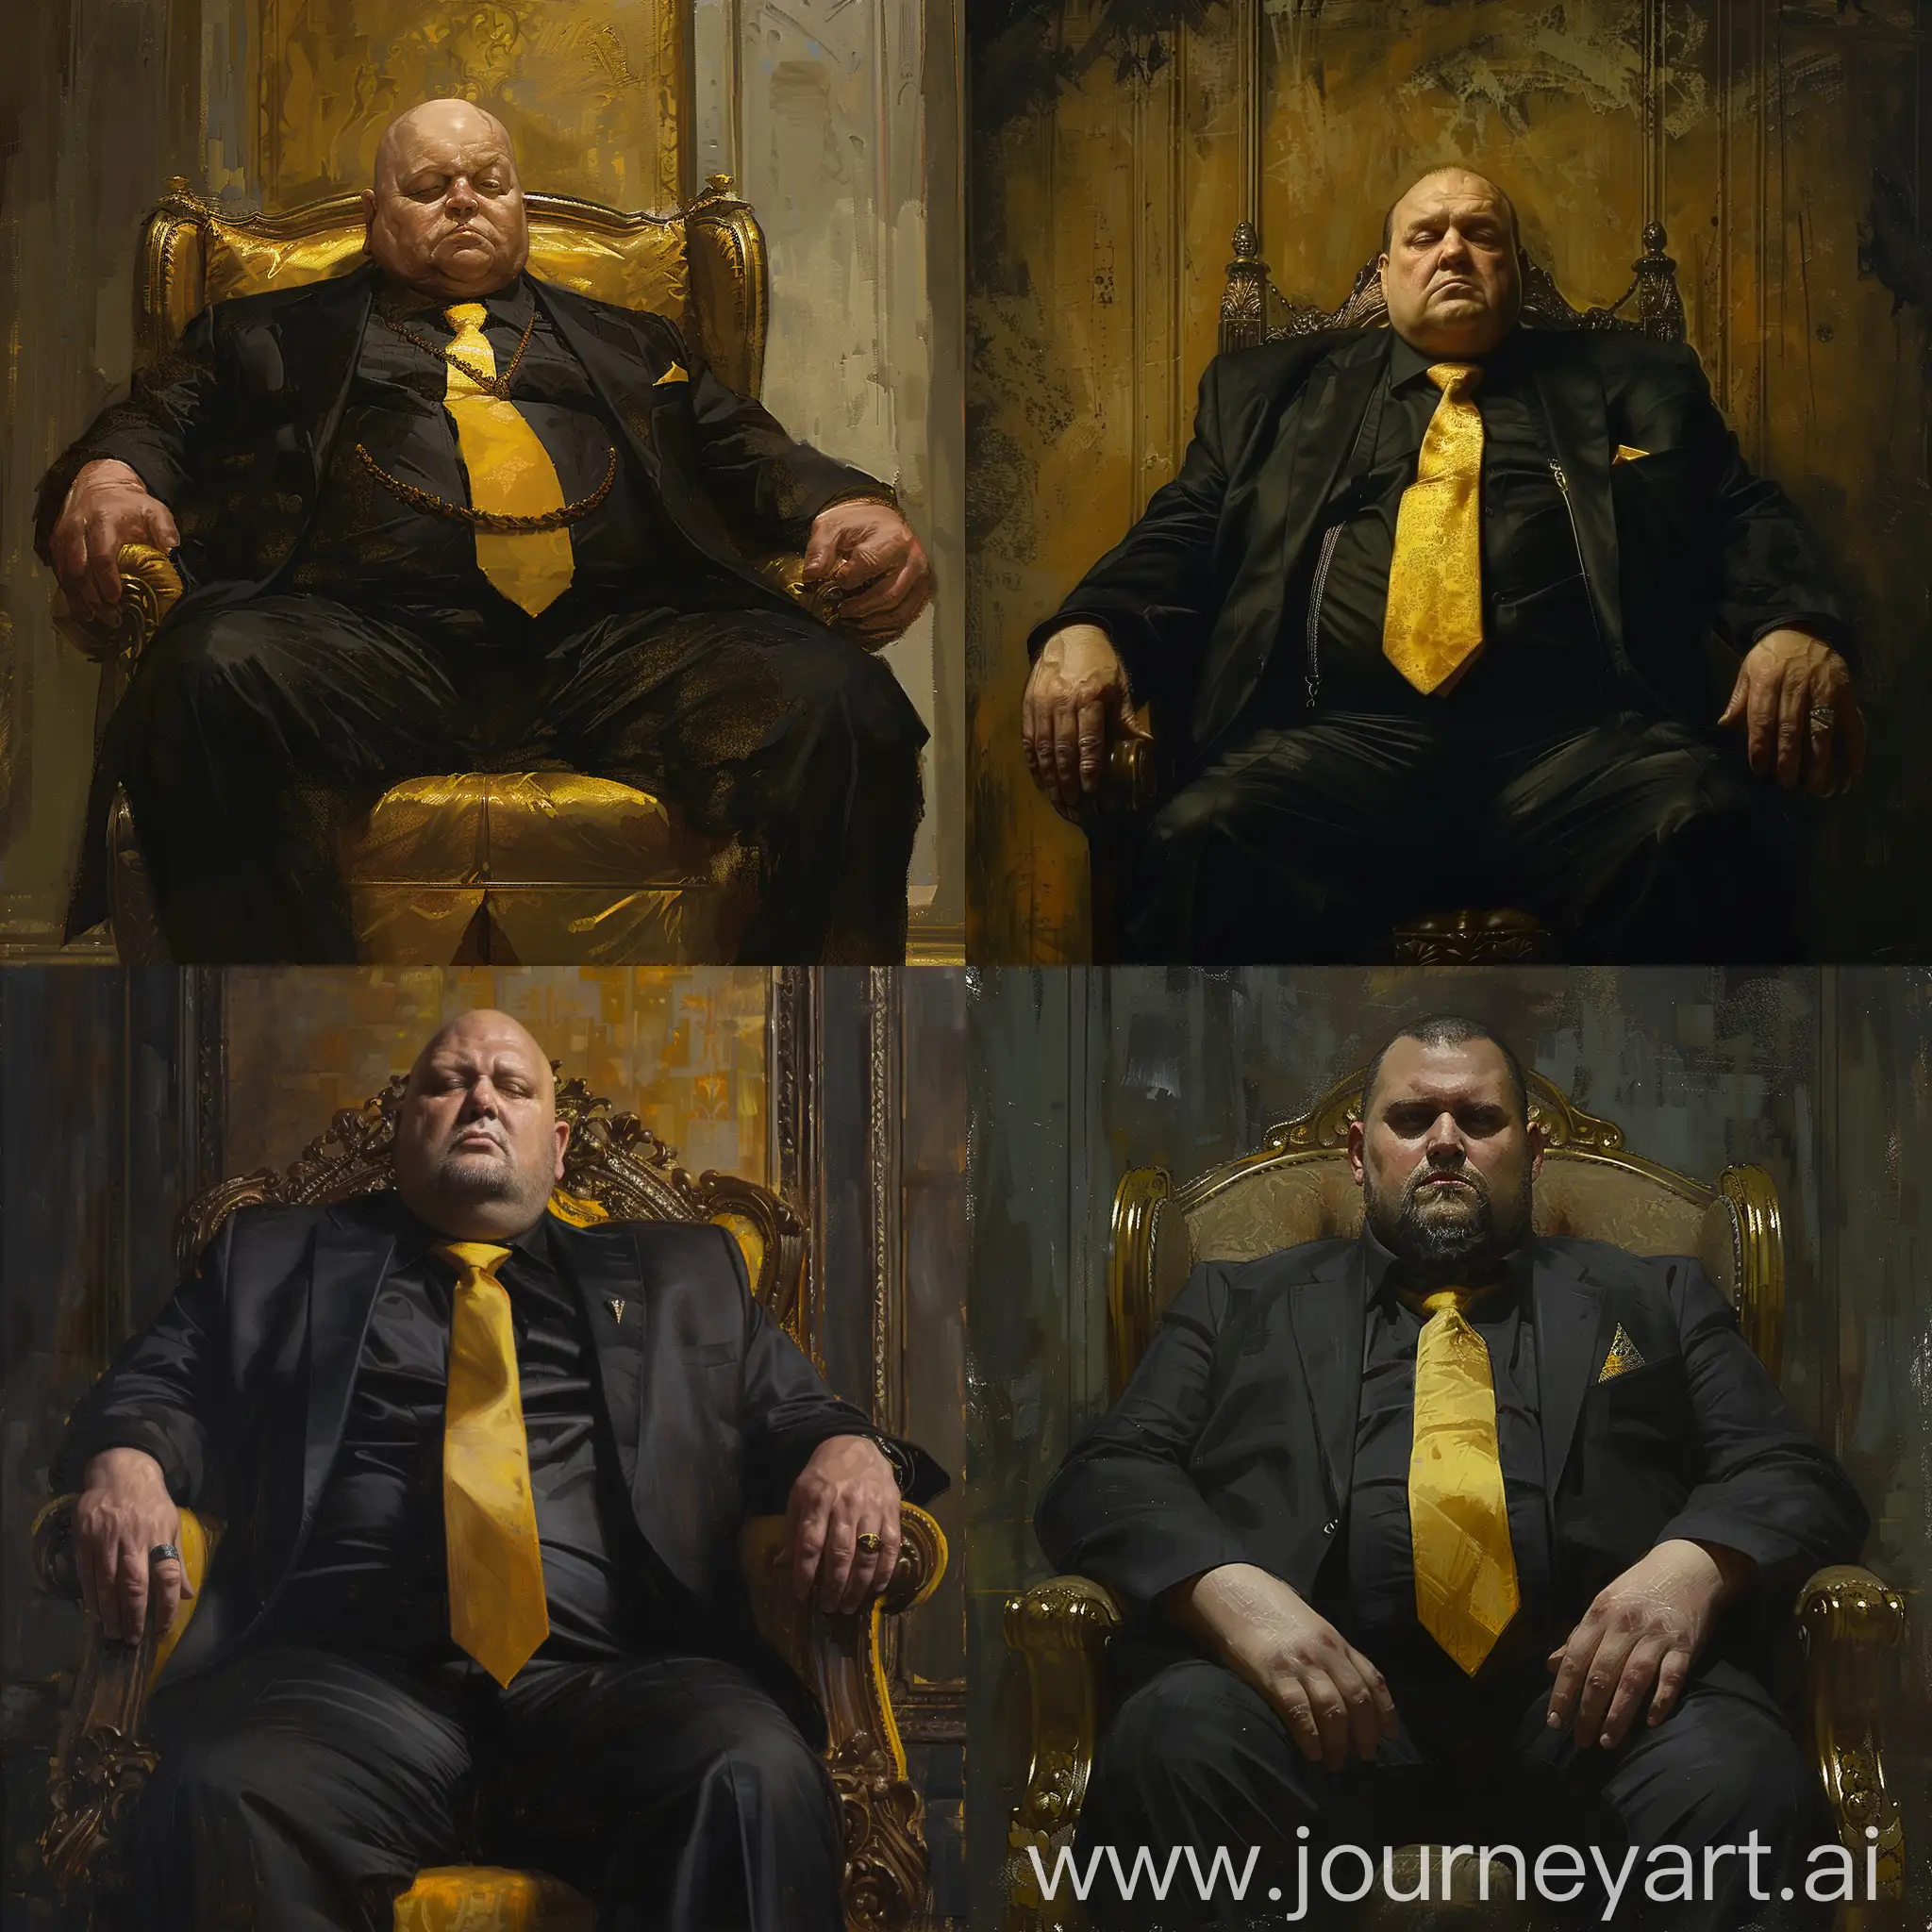 Wealthy-Millionaire-Max-Maxbetov-in-Black-Suit-and-Yellow-Tie-Sitting-on-Throne